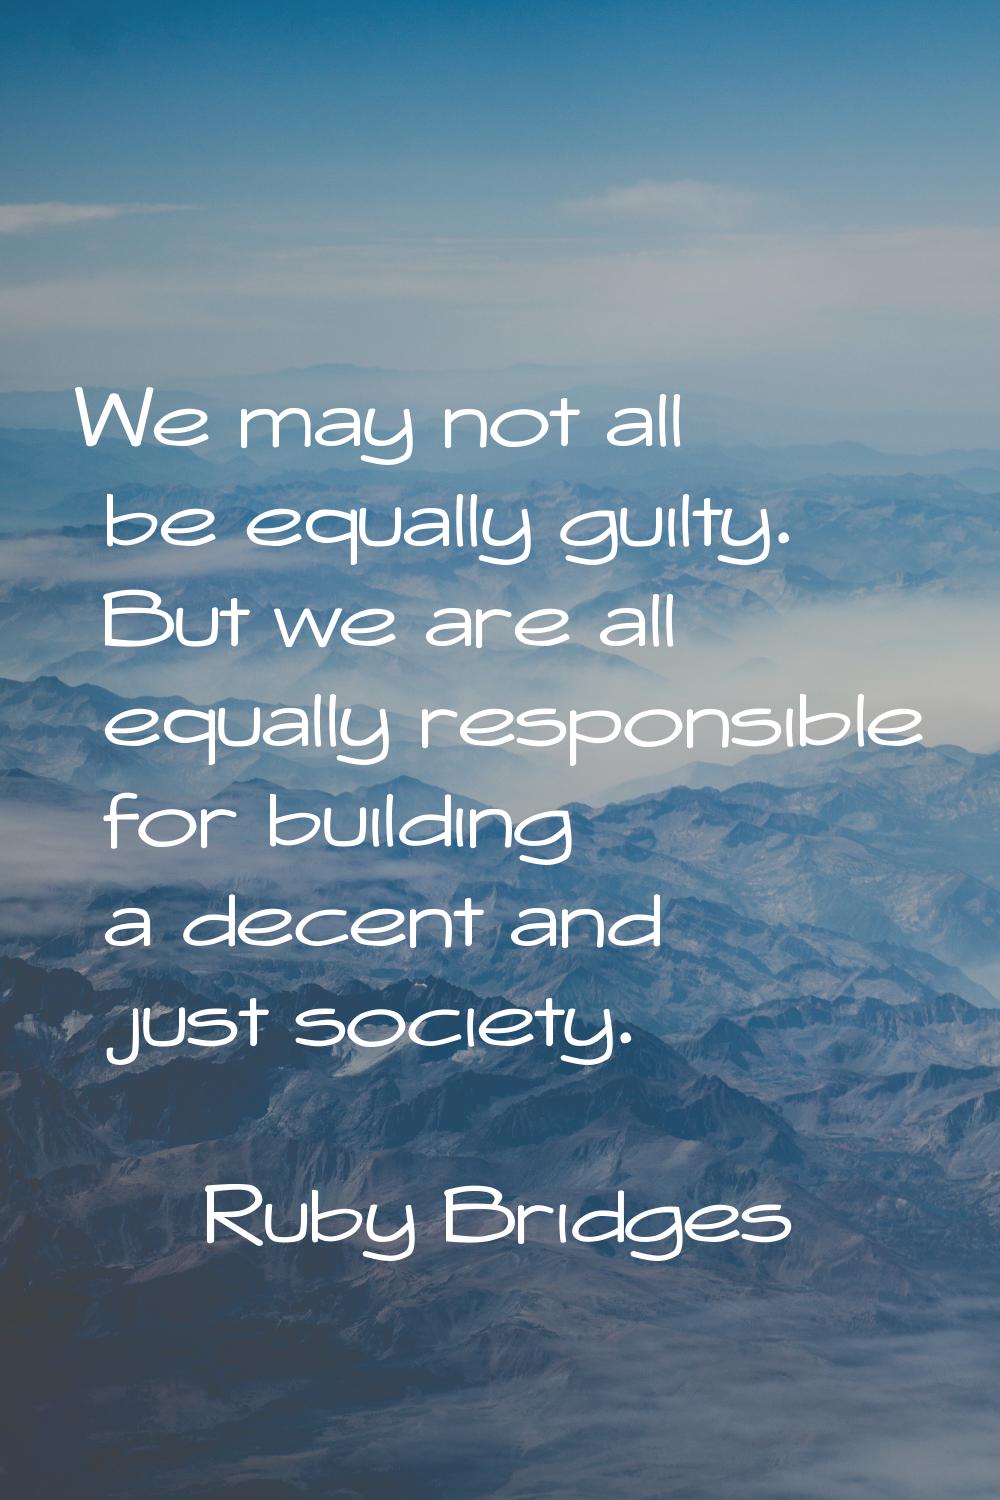 We may not all be equally guilty. But we are all equally responsible for building a decent and just